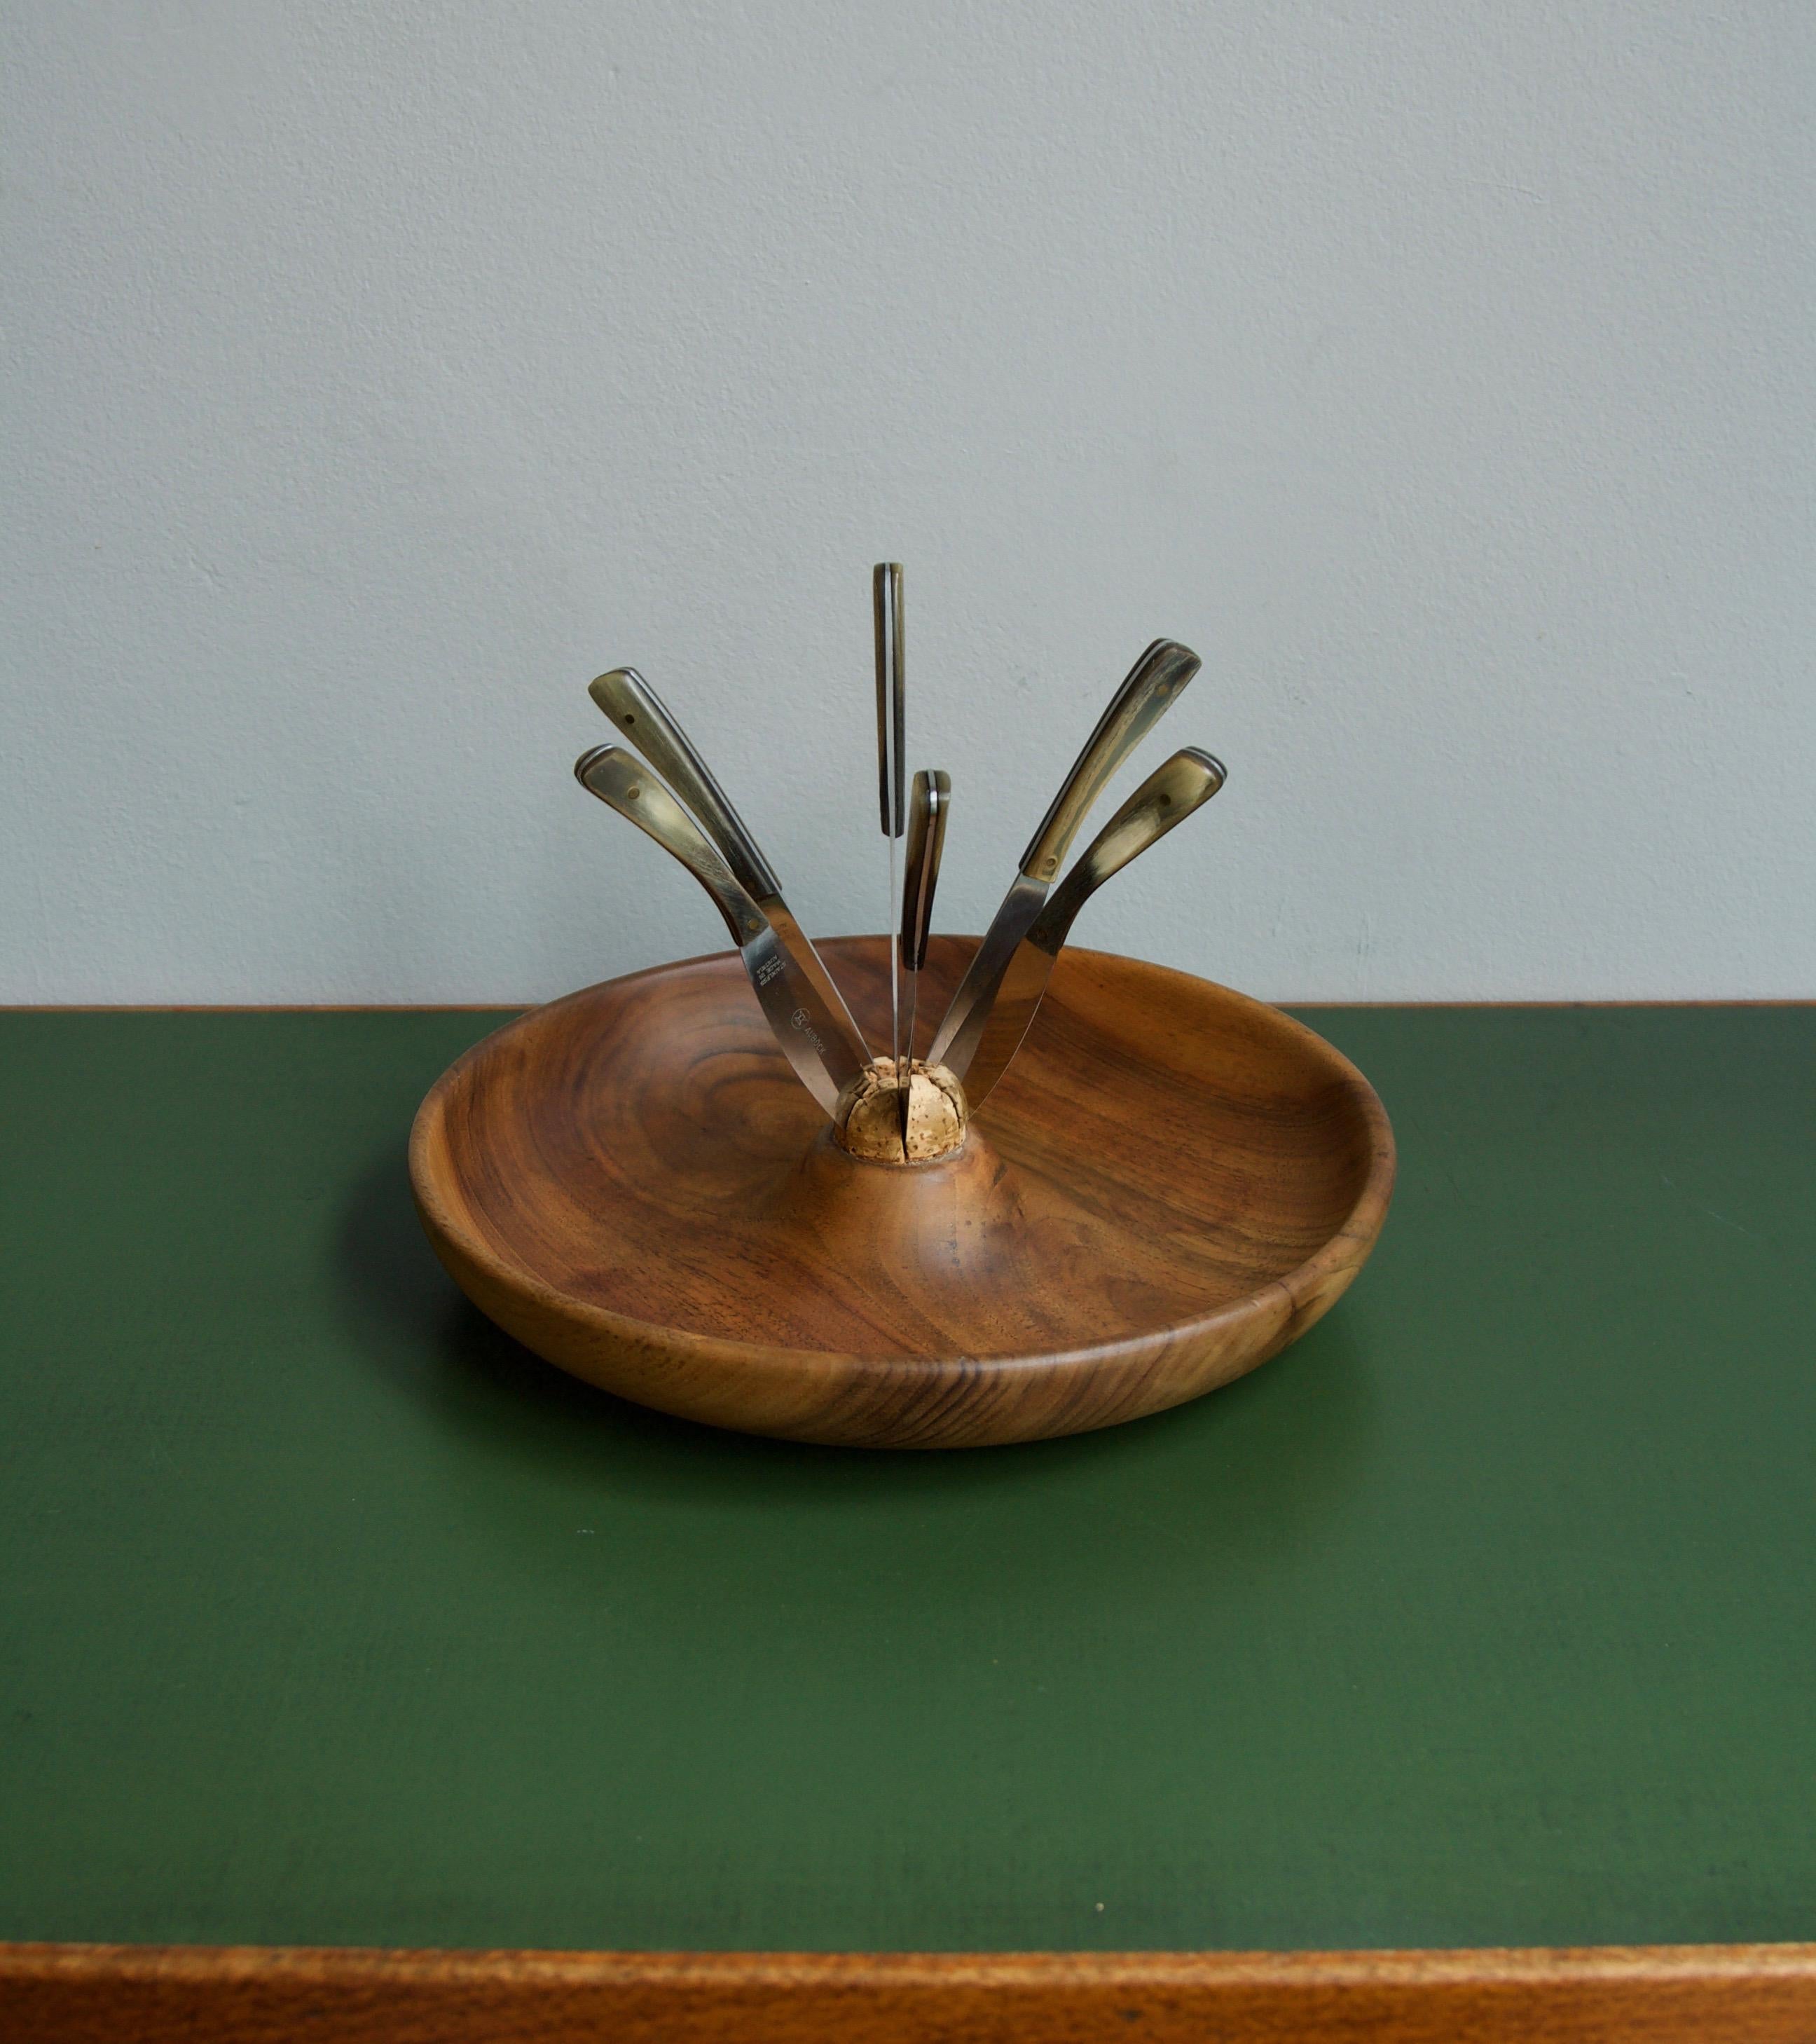 A sculptural fruit bowl and knife set designed and made by Carl Auböck II, Austria, circa 1955.
Formally known as Model #4640 the set consists of a carved walnut wood bowl with a cork insert and a set of six stainless steel knives with horn clad